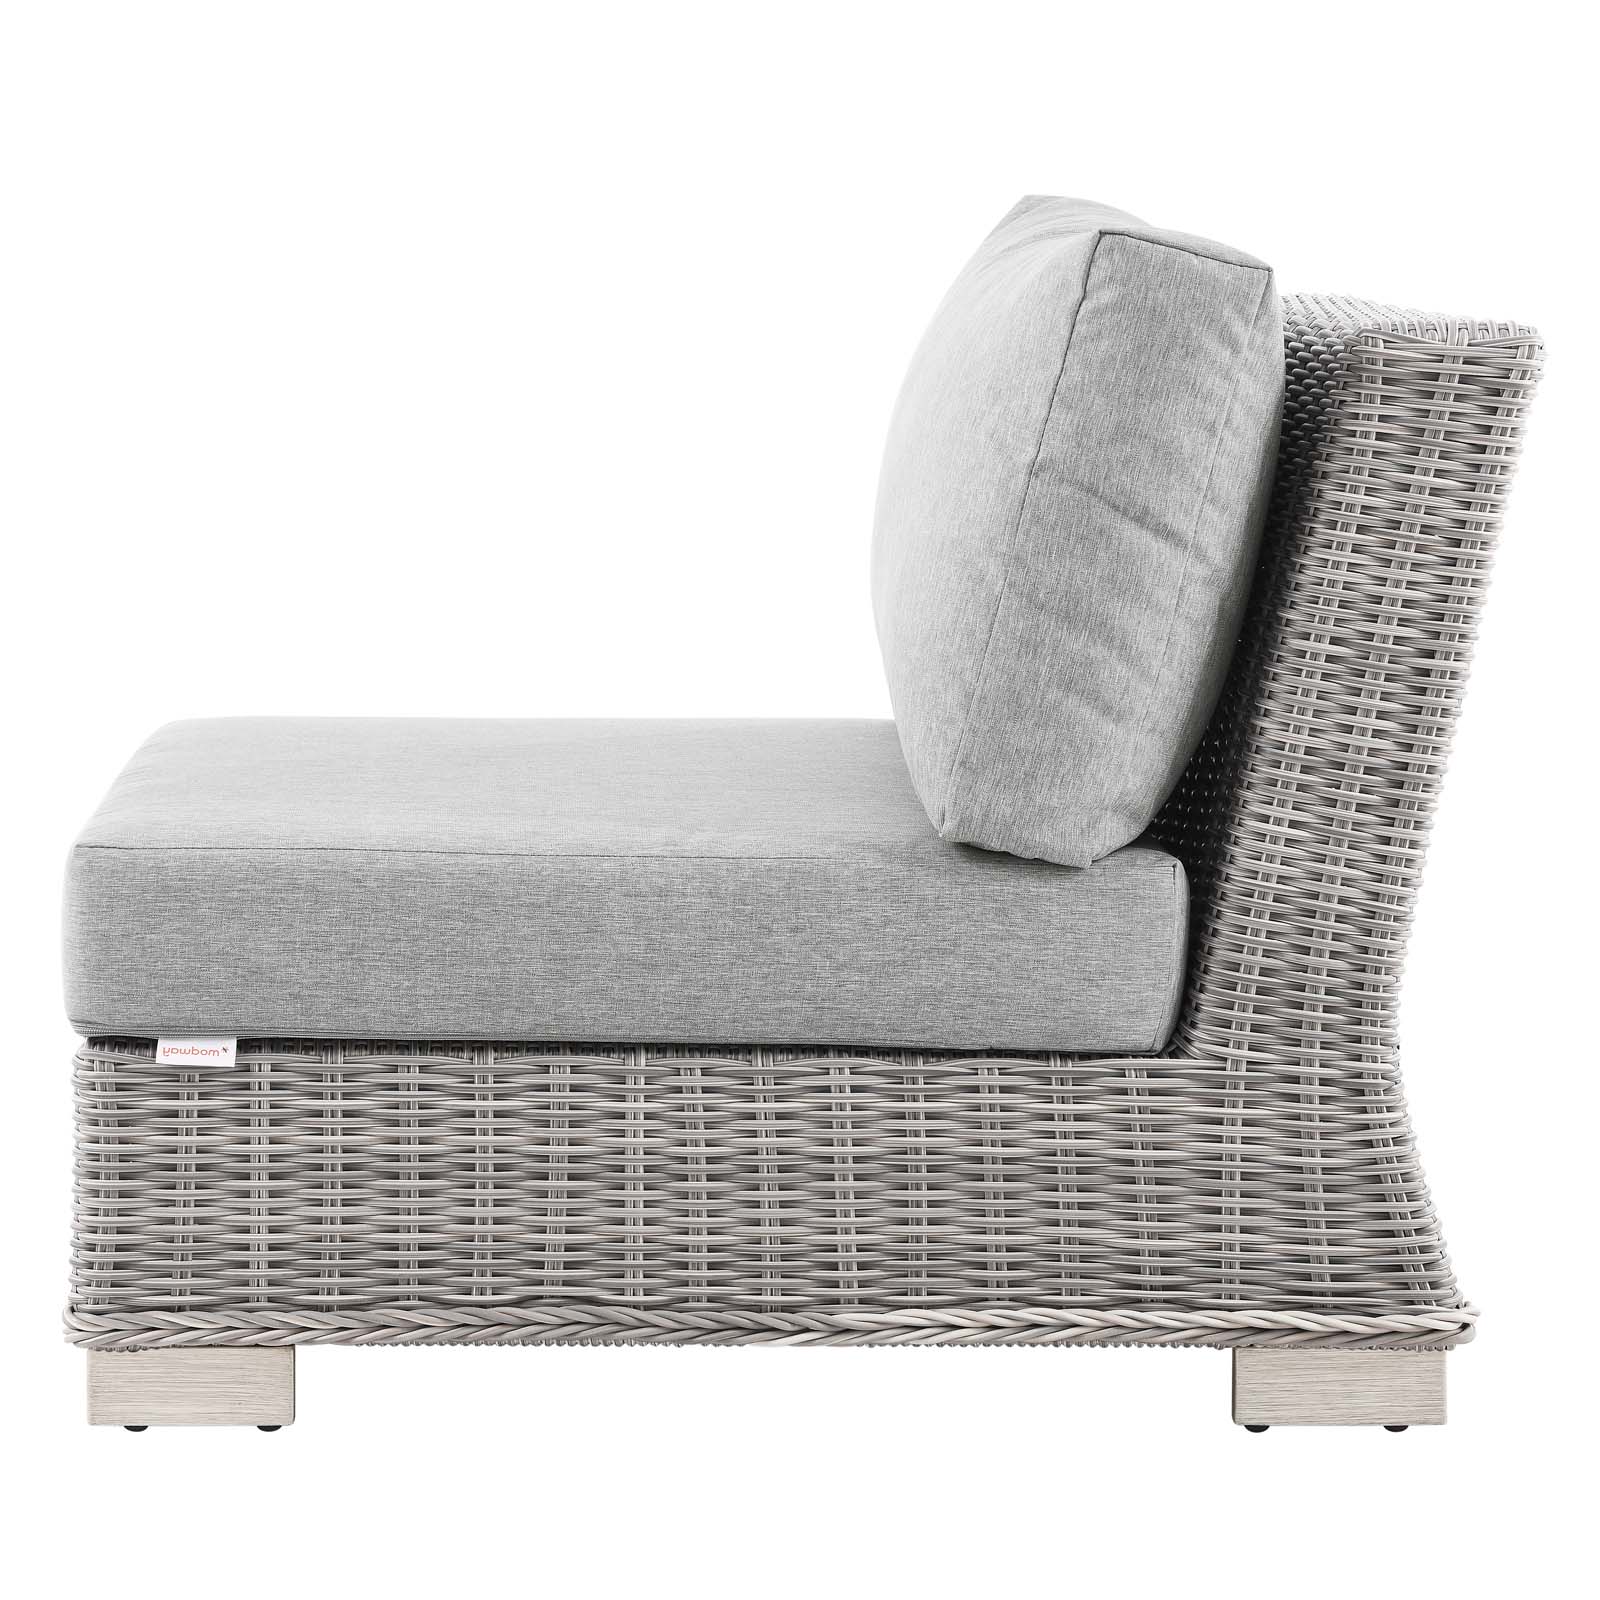 Lounge Sectional Sofa Chair Set, Rattan, Wicker, Grey Gray, Modern Contemporary Urban Design, Outdoor Patio Balcony Cafe Bistro Garden Furniture Hotel Hospitality - image 4 of 10